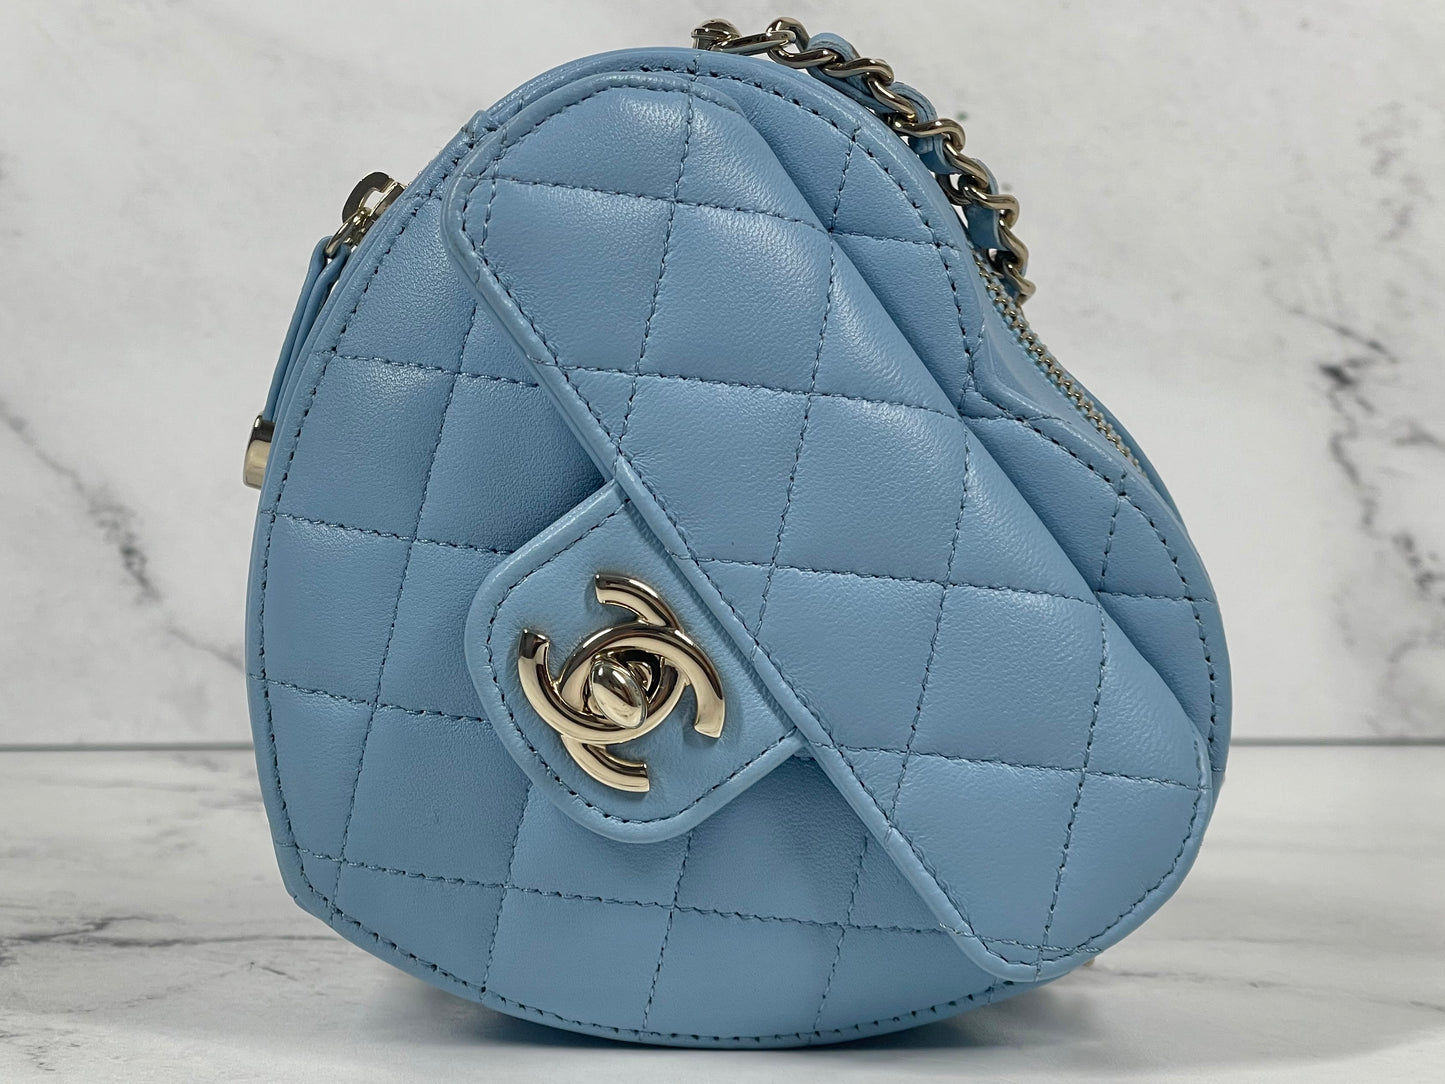 Chanel 22S Baby Blue Quilted Lambskin Small Heart Bag Clutch with on Chain